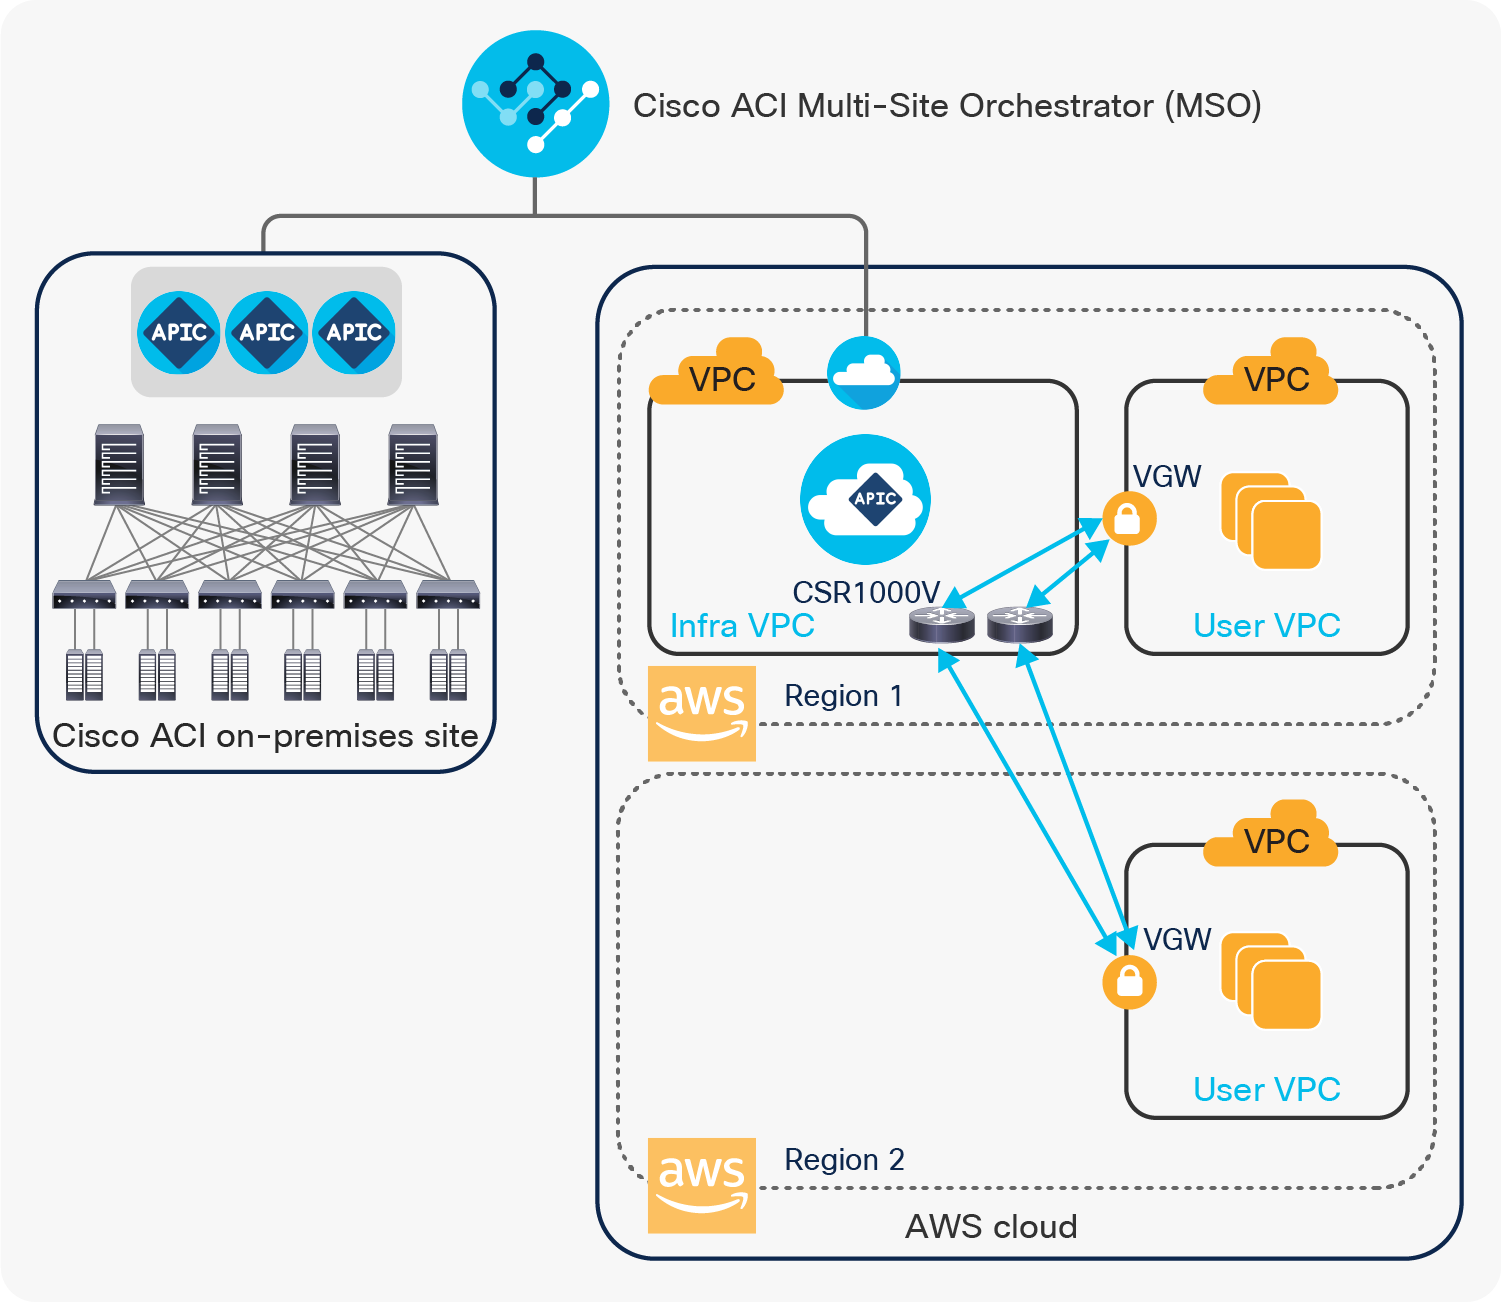 Cisco Cloud ACI AWS multi-region site with shared Infra VPC using IPsec tunnels with VGW